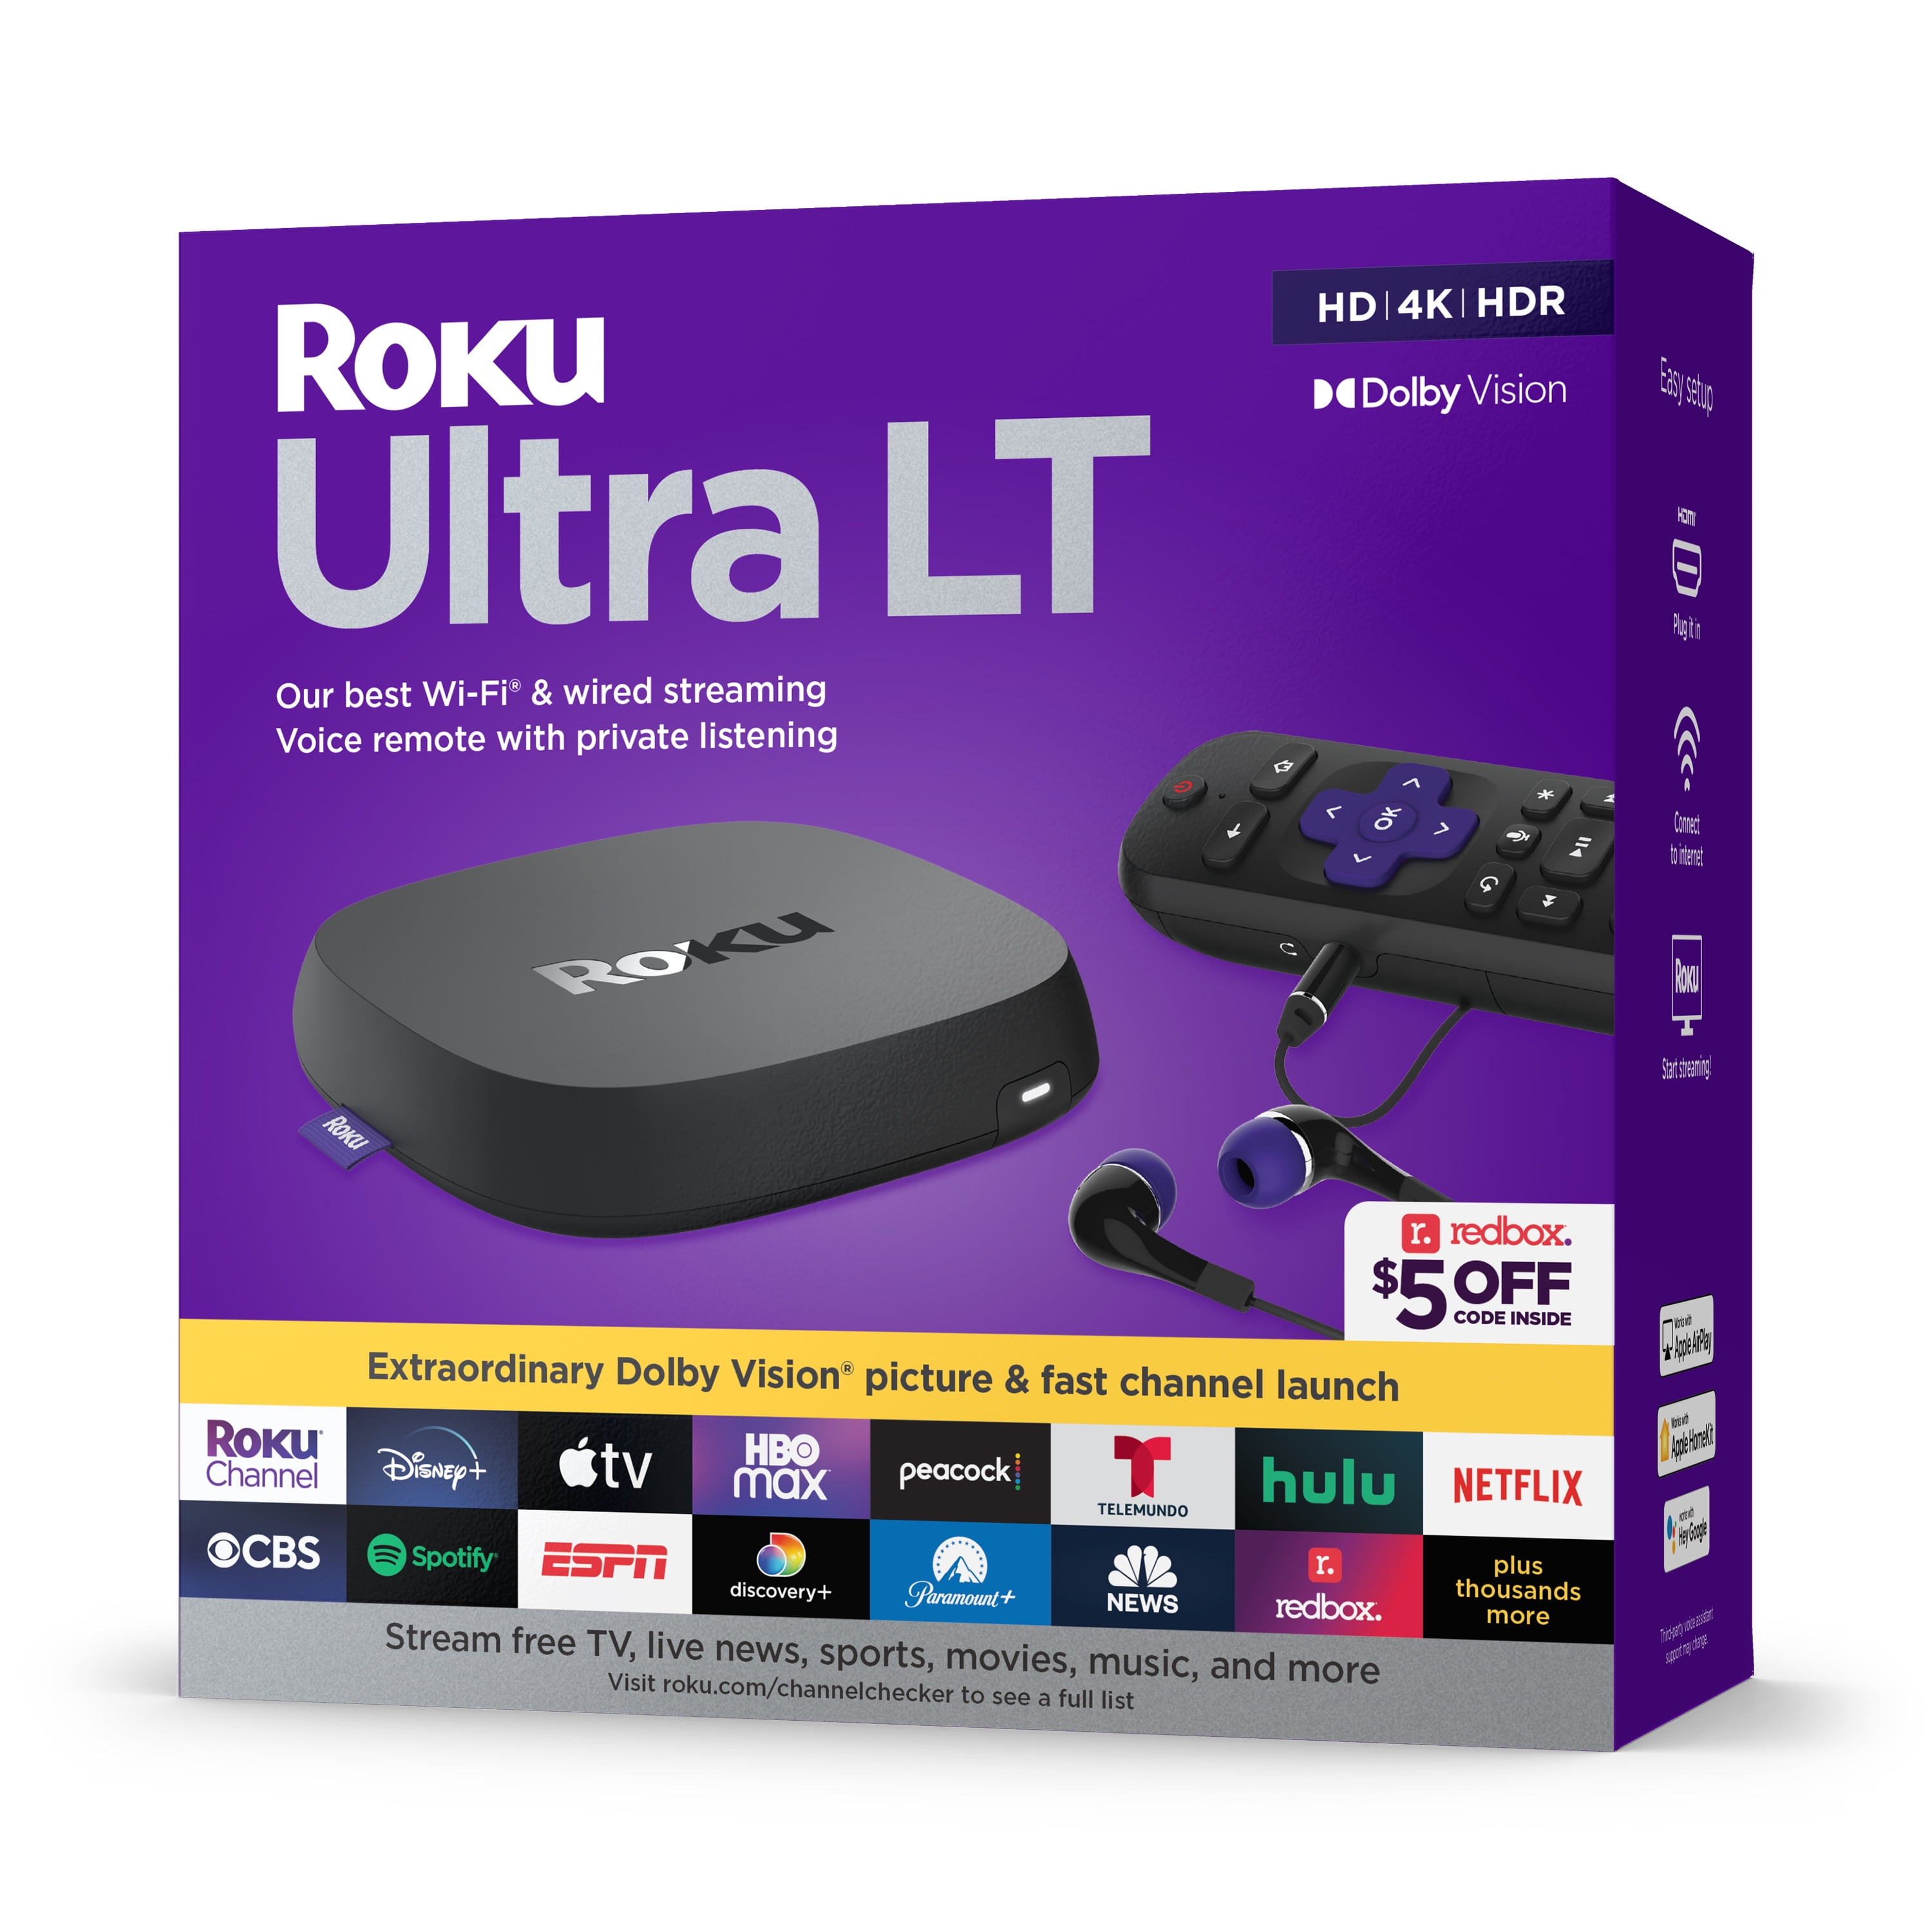 Roku Ultra LT Streaming Device 4K/HDR/Dolby Vision with Roku Voice Remote, Private Listening, and Premium HDMI Cable